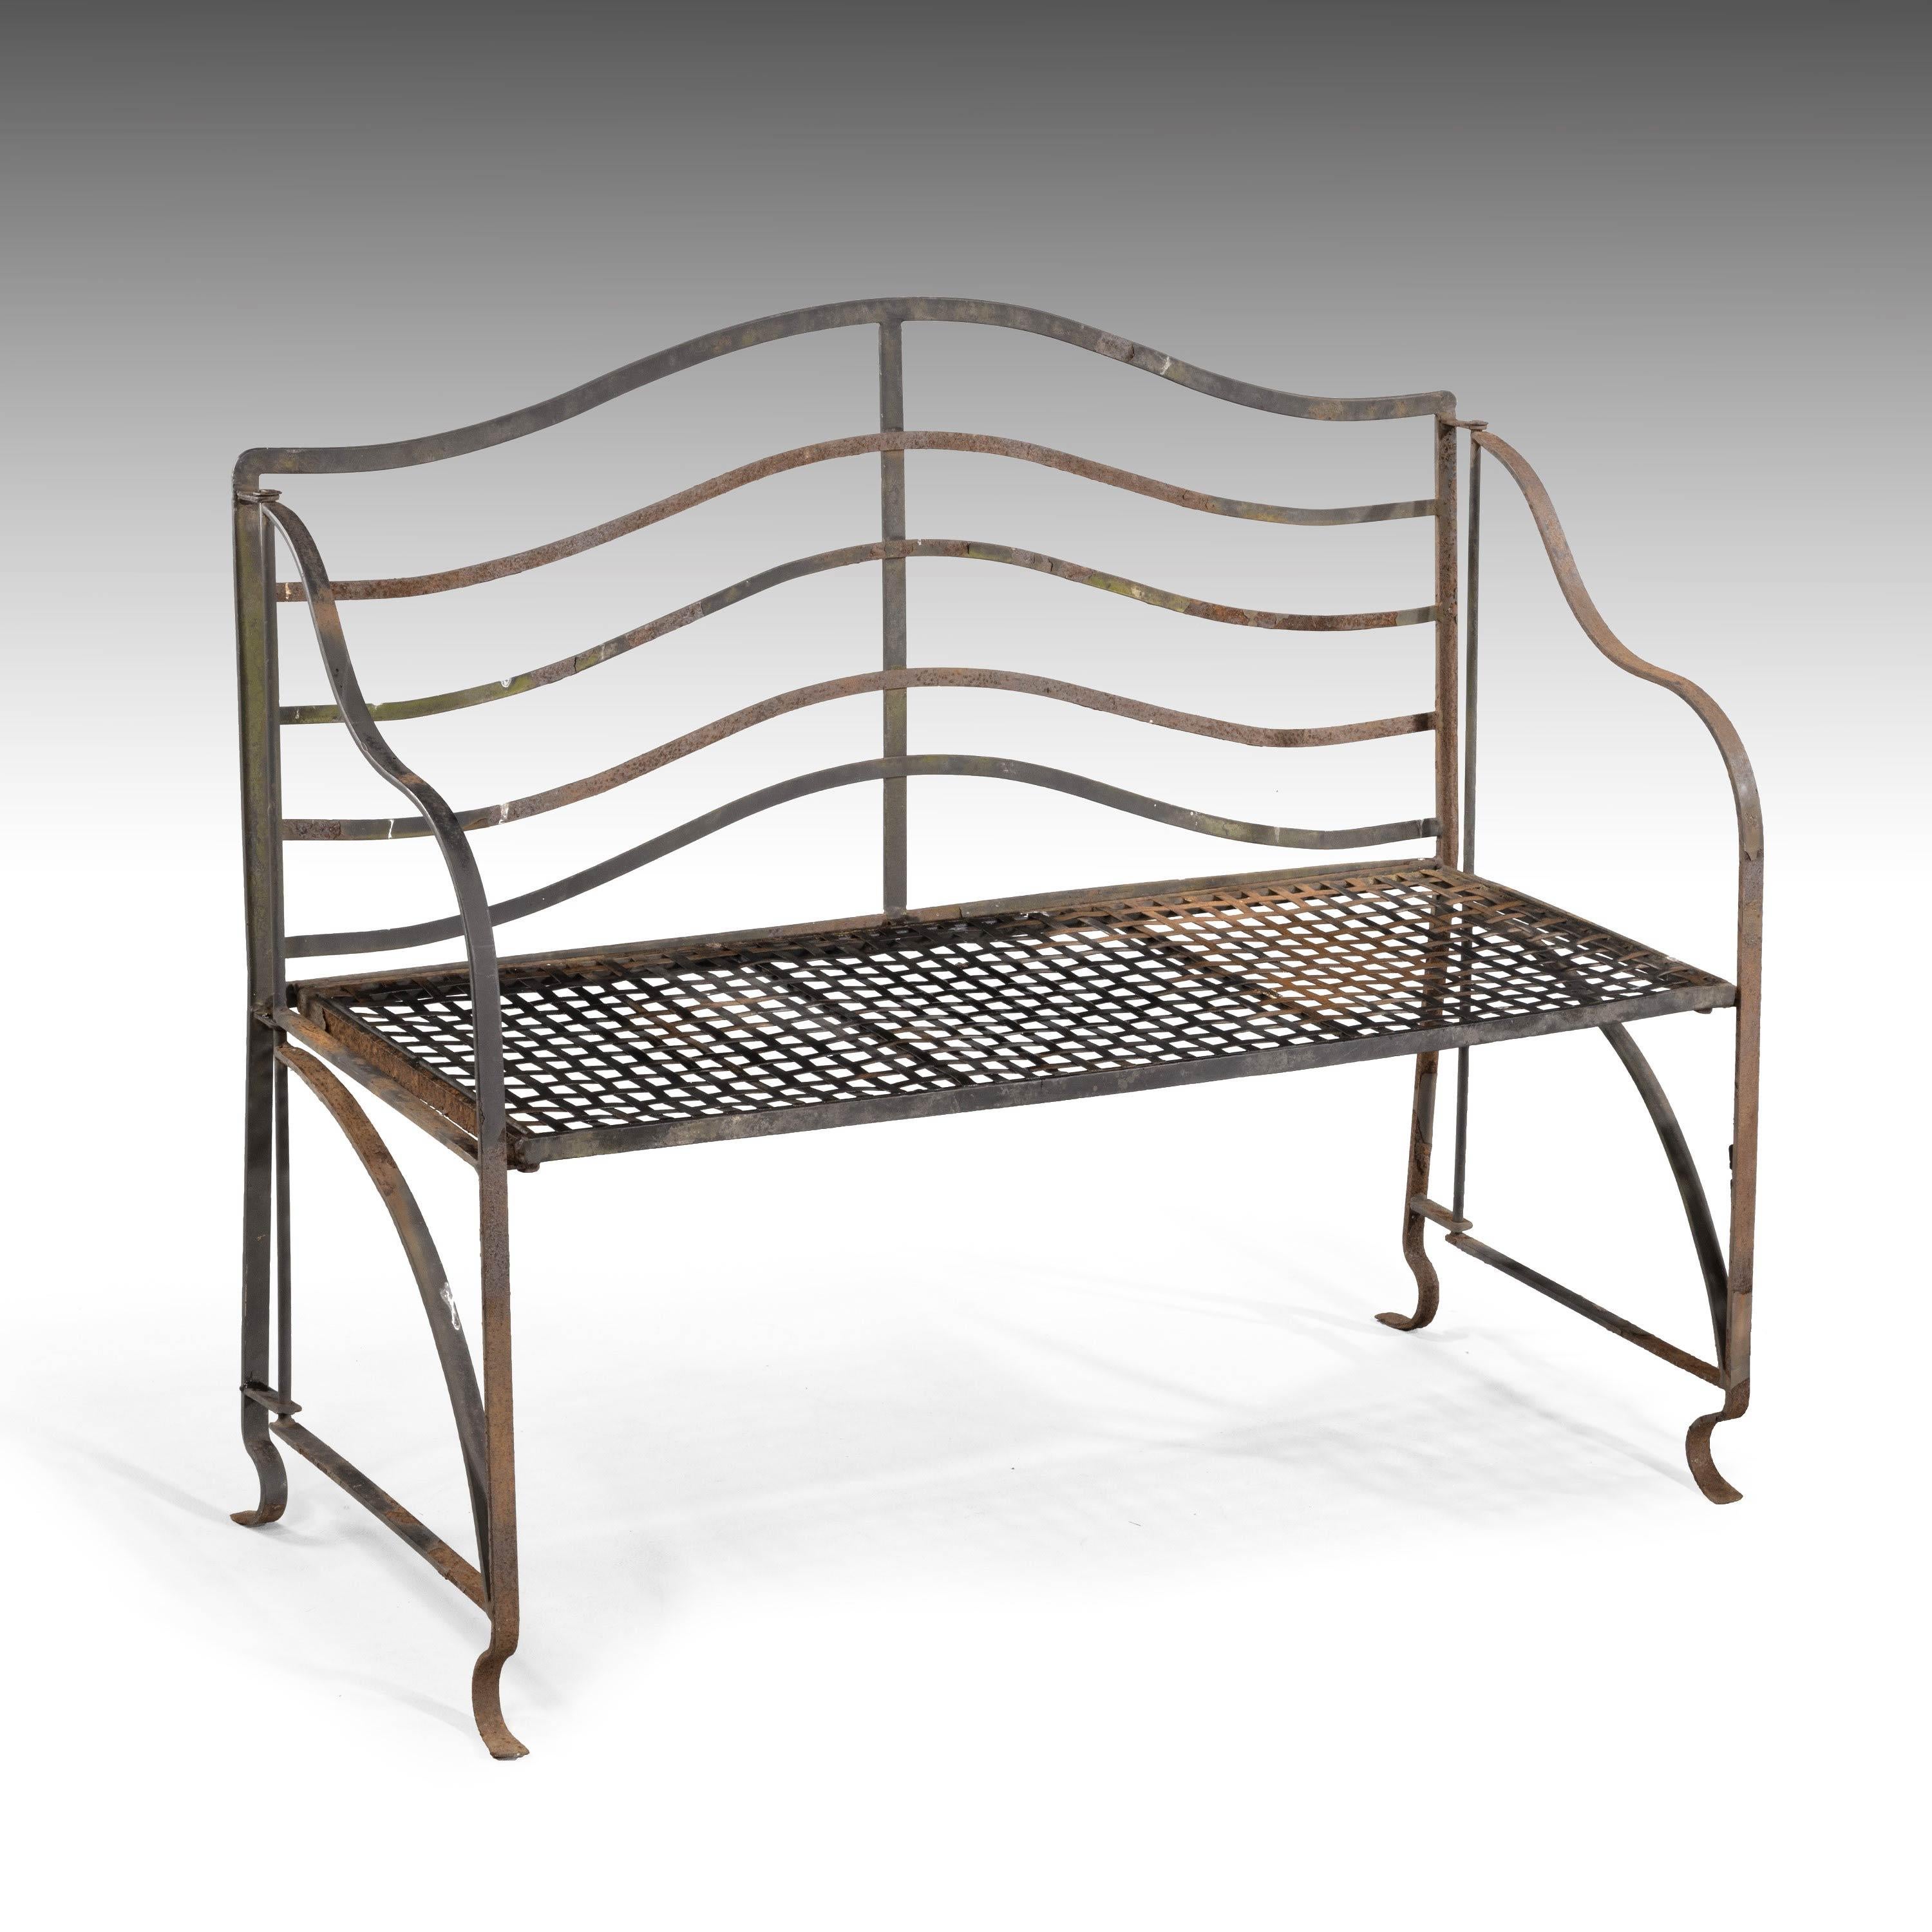 A most elegant pair of iron garden benches of particularly fine line. With the original strapwork woven iron seats.
Measures: Seat height 17.25